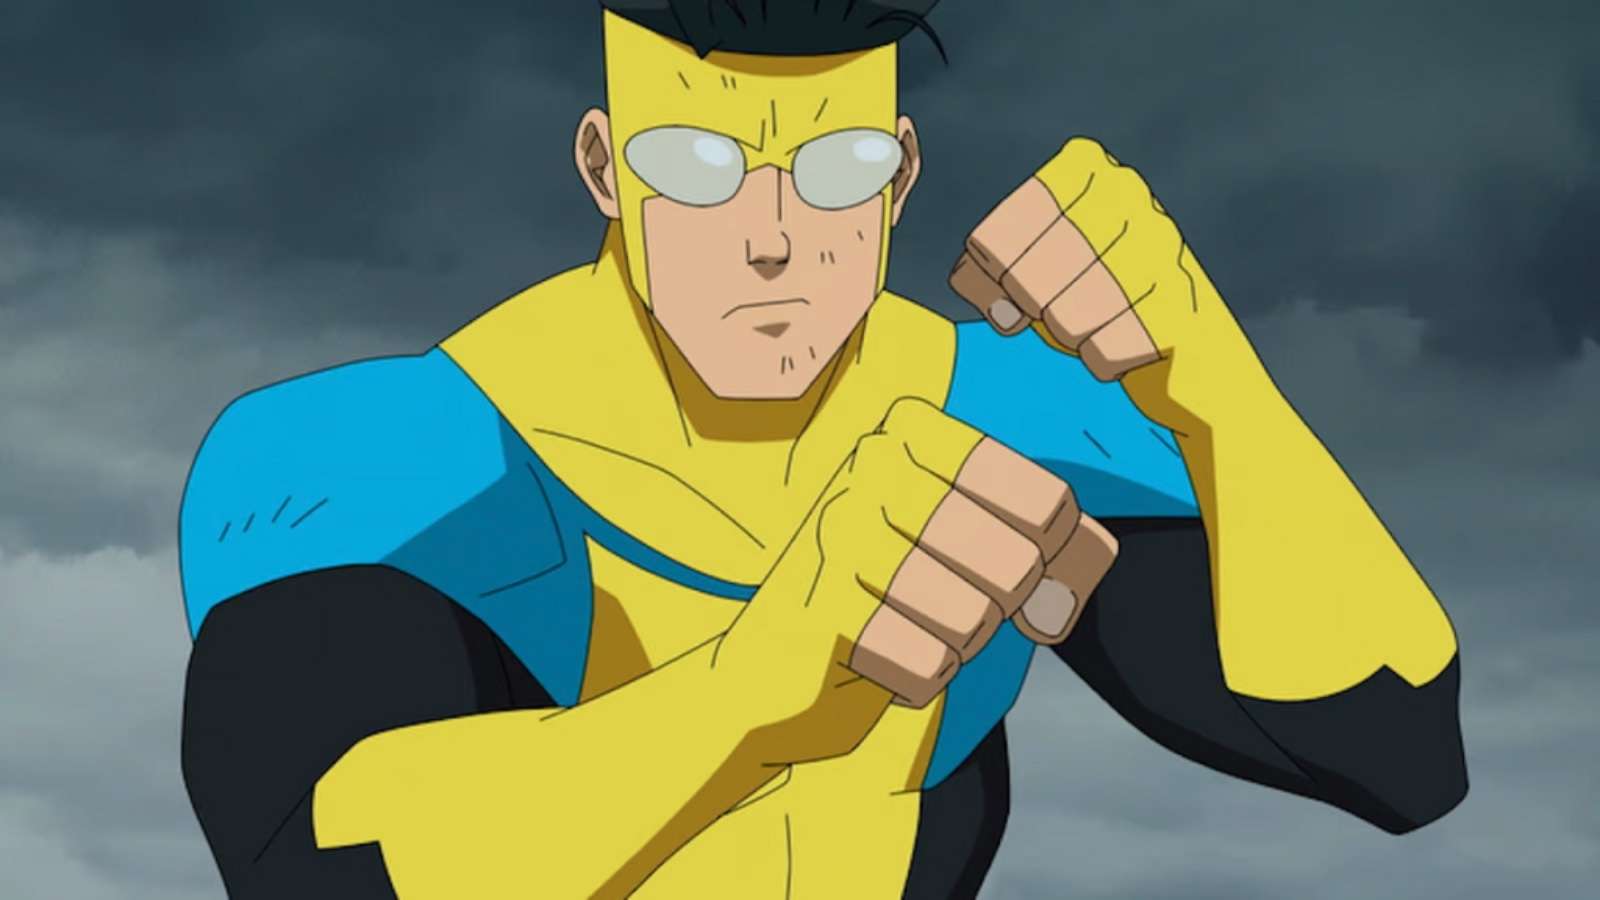 Character Mark Grayson in Invincible voiced by Steven Yeun.